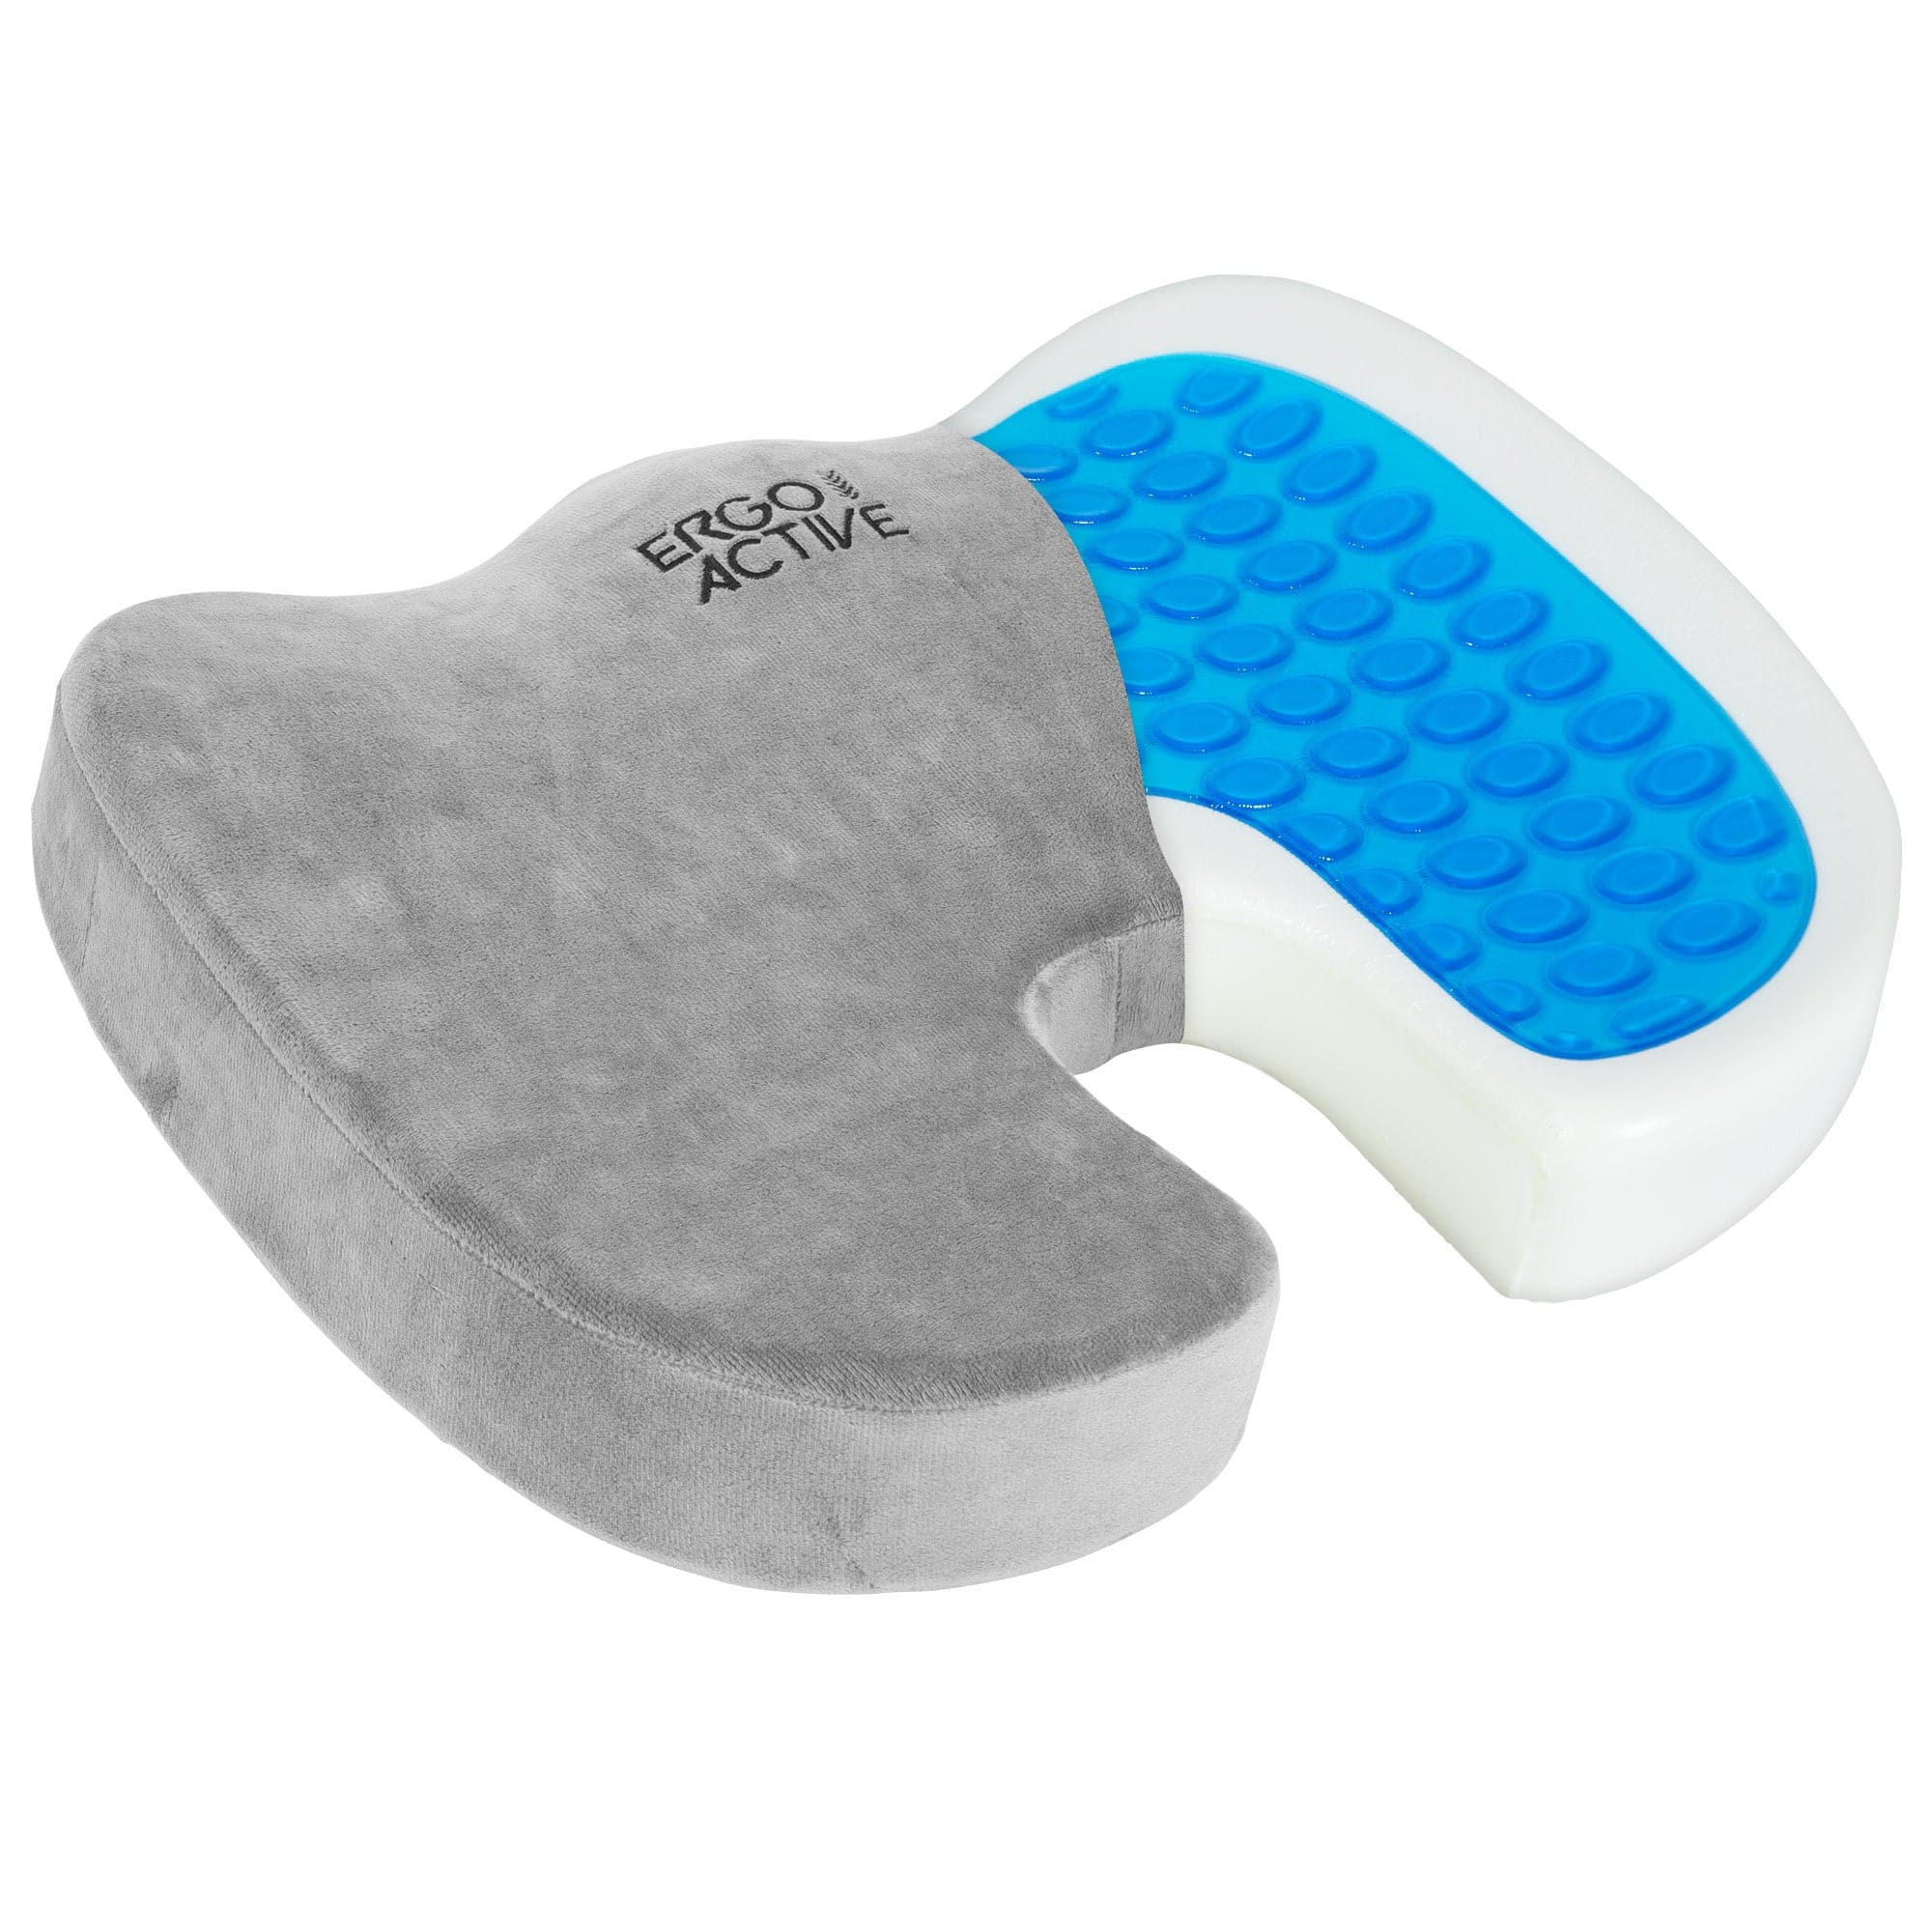 What Is the Best Seat Cushion Material: Gel or Memory Foam